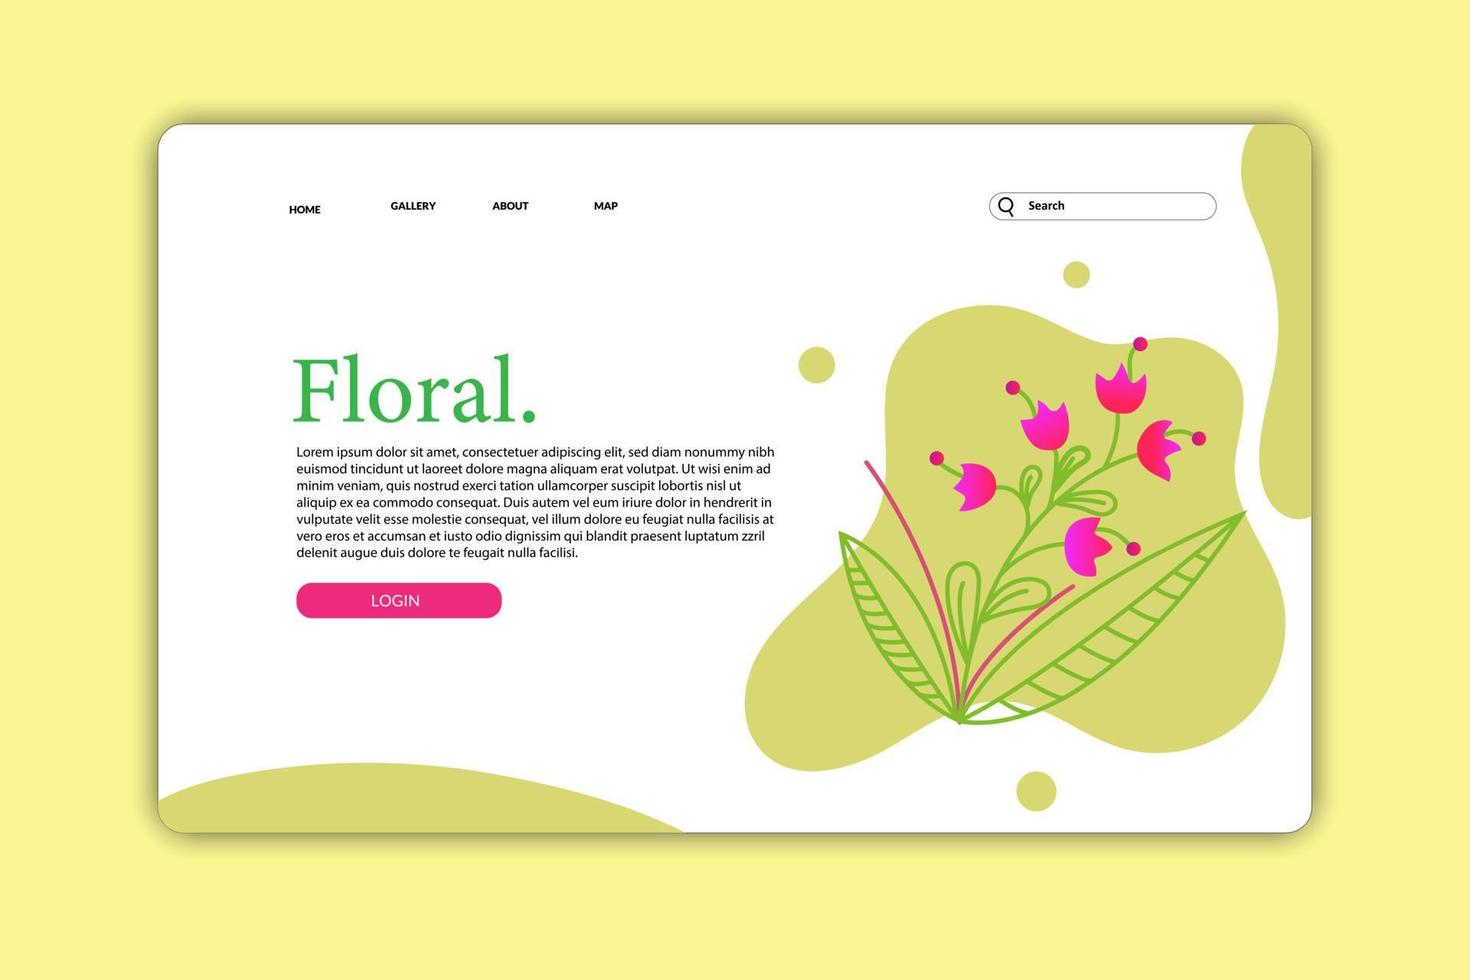 Design landing page or web page design templates for beauty, spa, wellness, natural products, cosmetics, body care. Gradient vector illustration concepts for website and mobile website development.